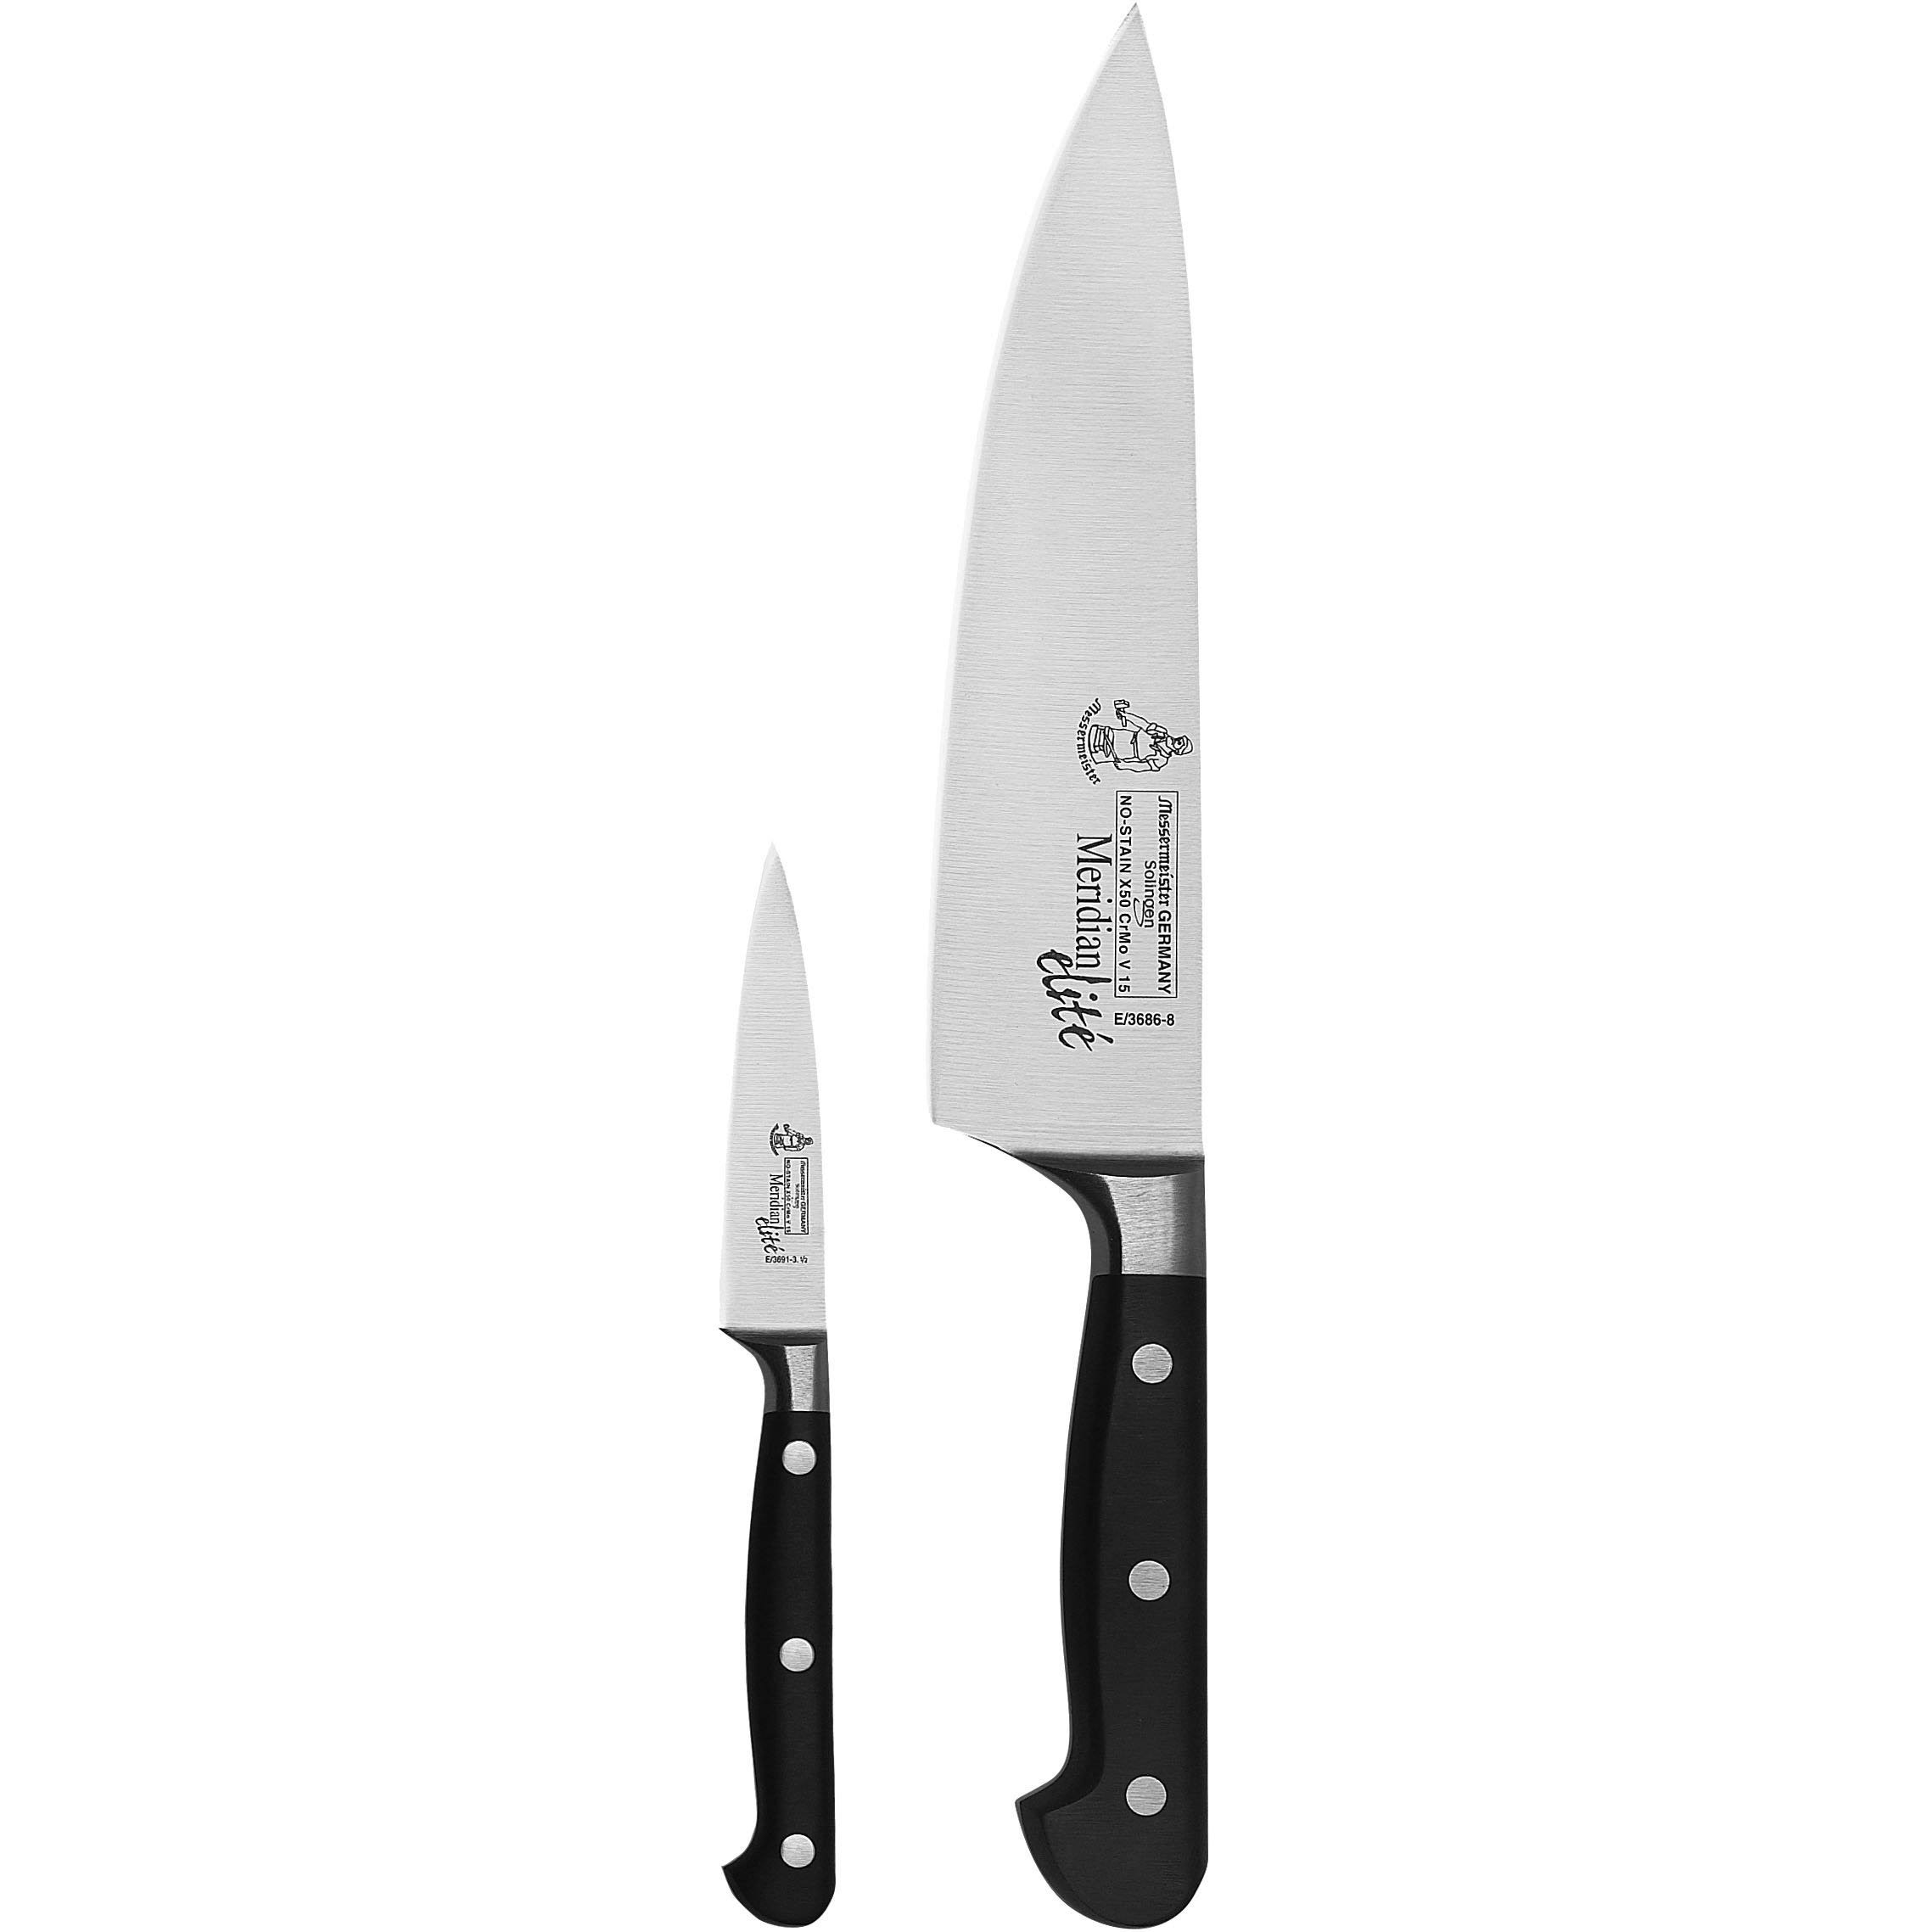 Messermeister Meridian Elite 2-Piece Chef's and Paring Knife Set